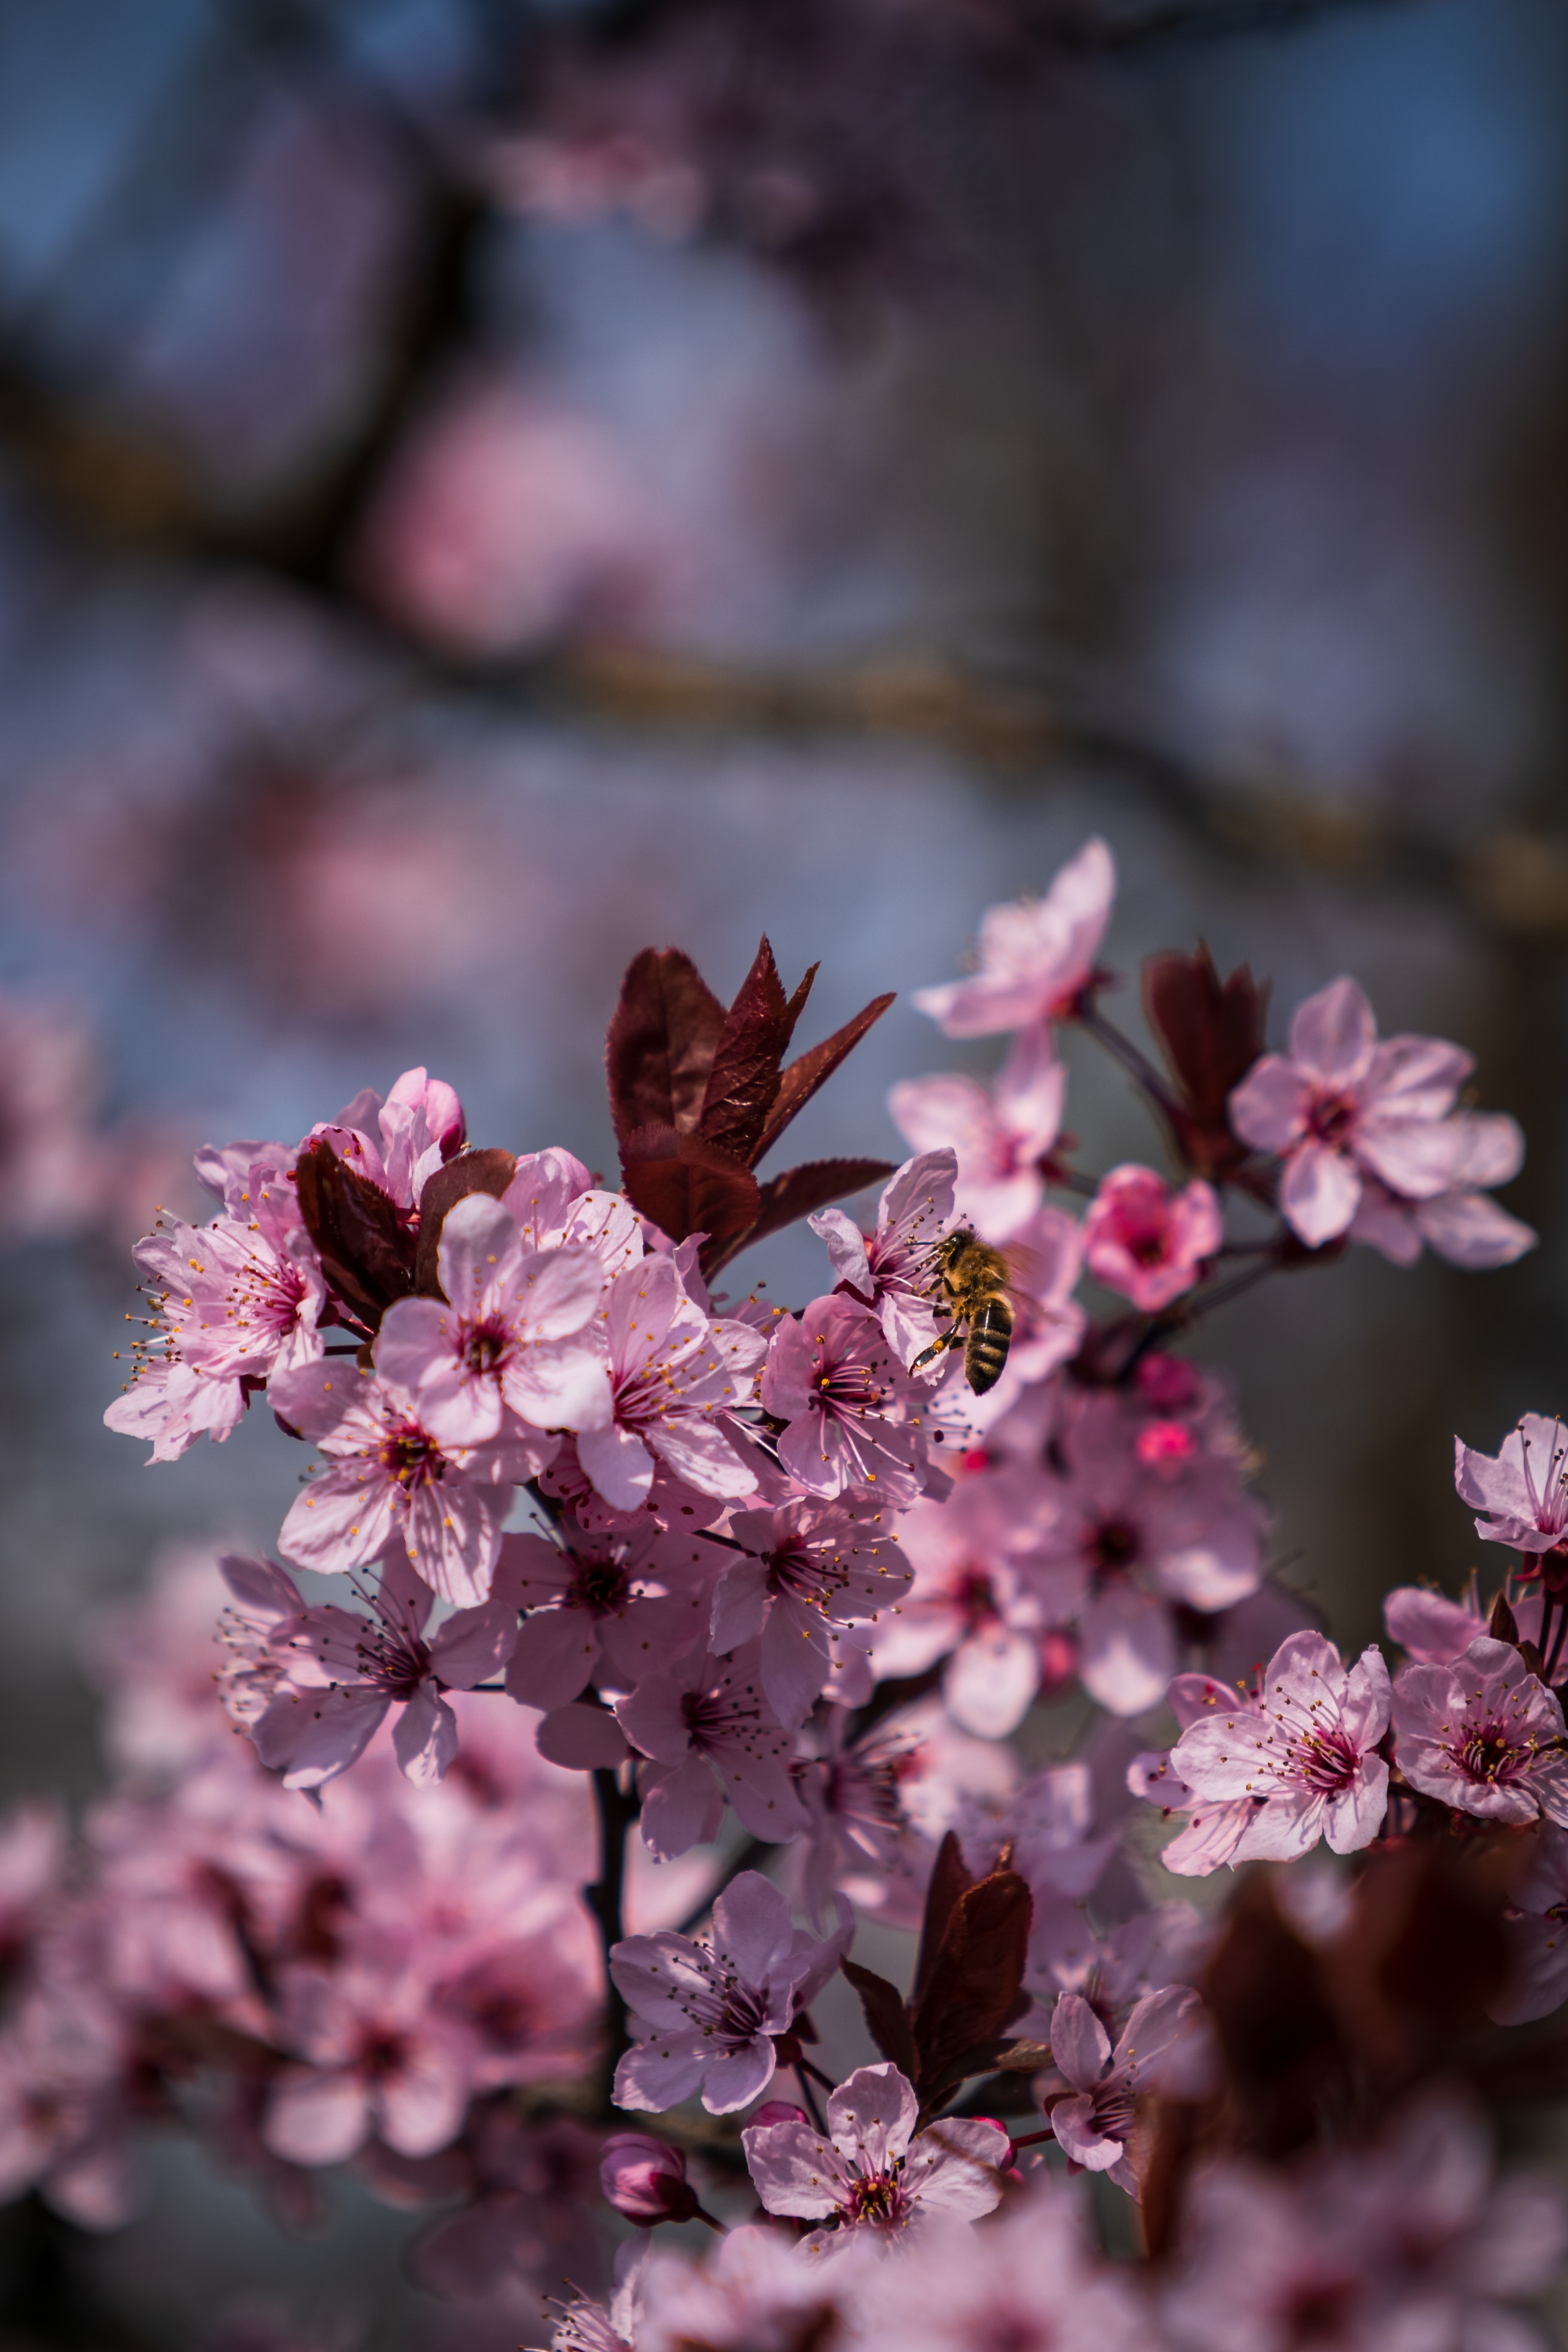 61942 download wallpaper flowers, petals, bee, spring screensavers and pictures for free